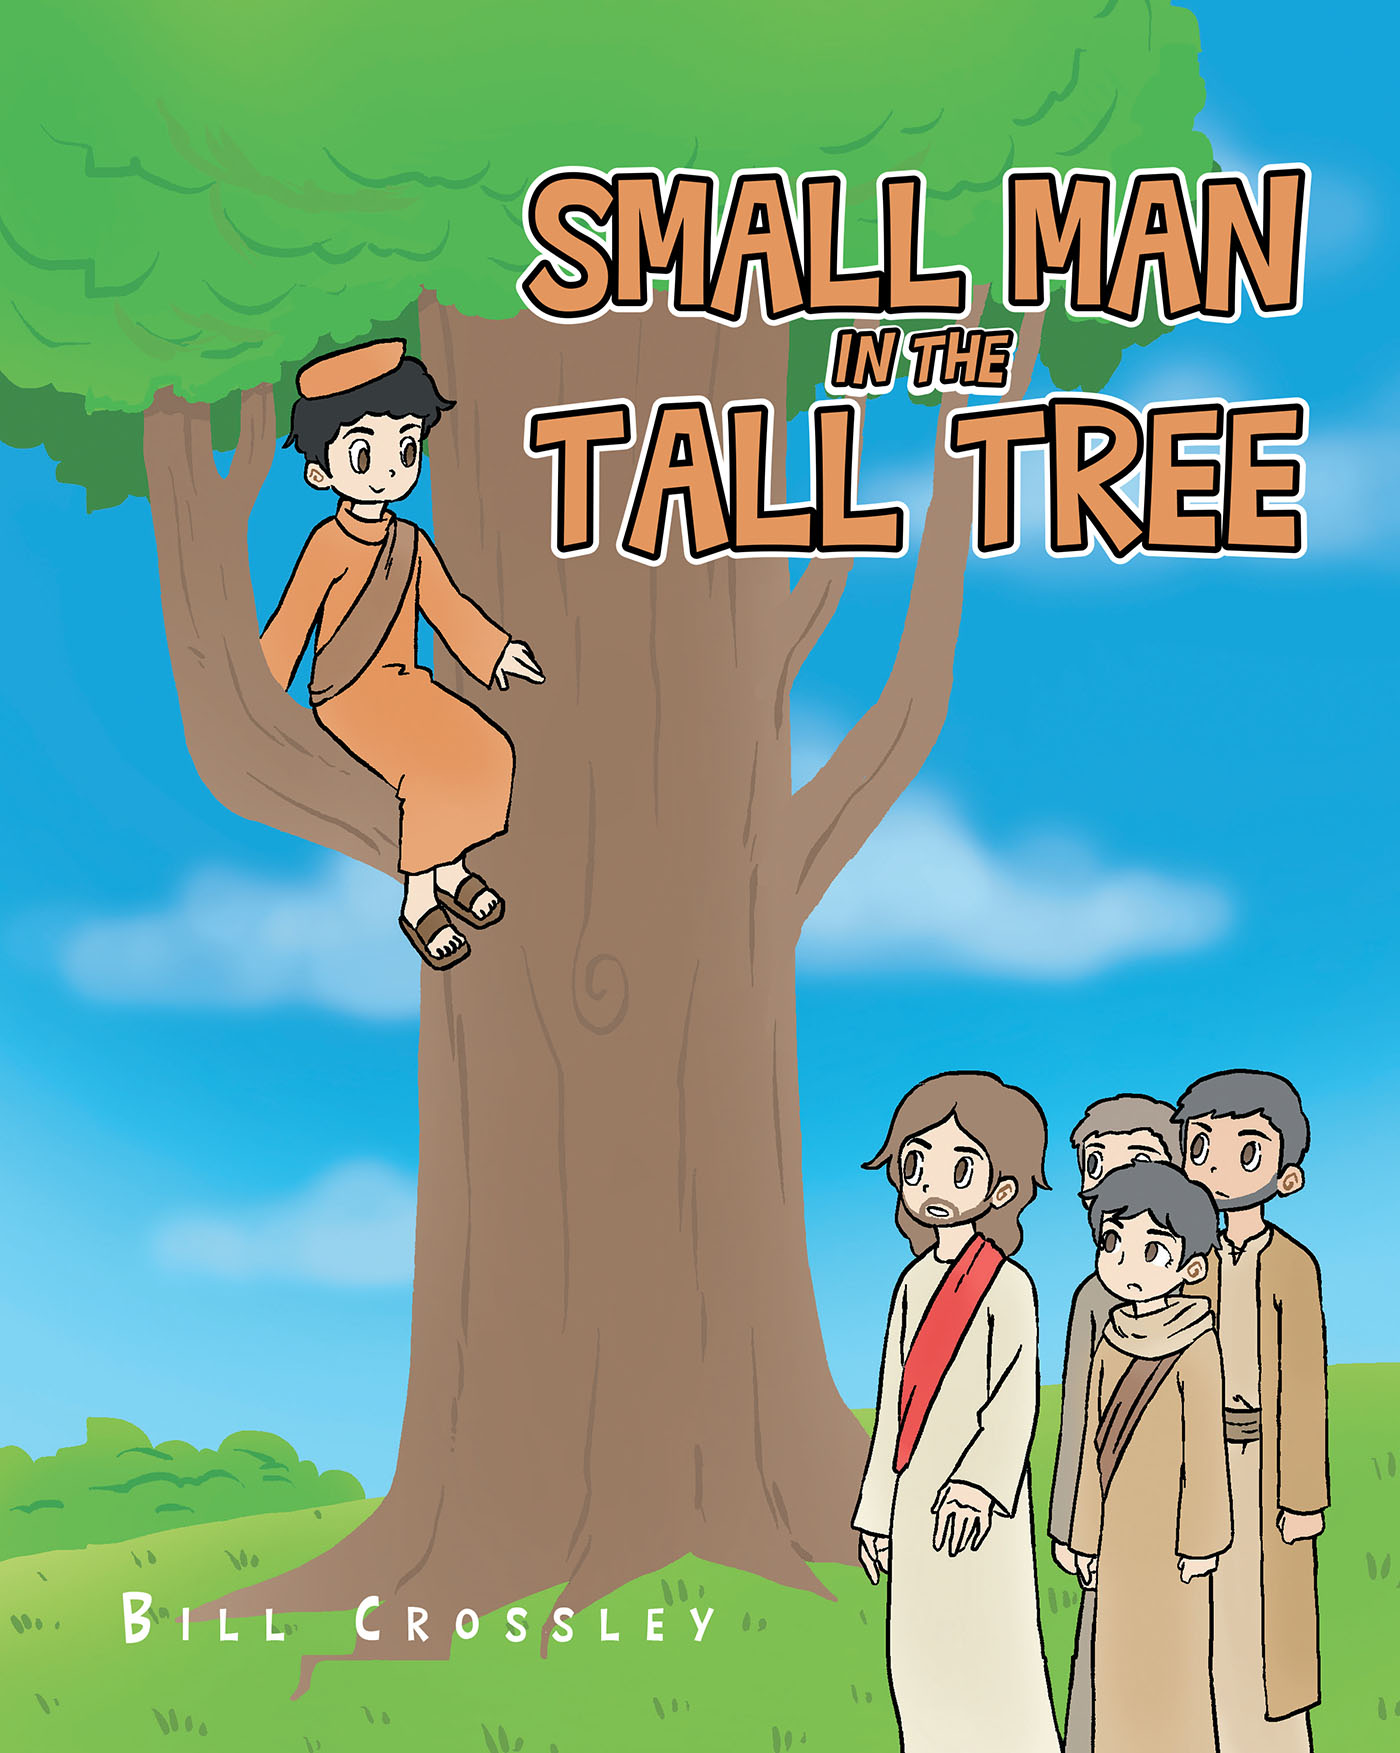 Bill Crossley’s Newly Released "Small Man in the Tall Tree" is a Creative Tale of the Importance of Perseverance When Times Get Tough